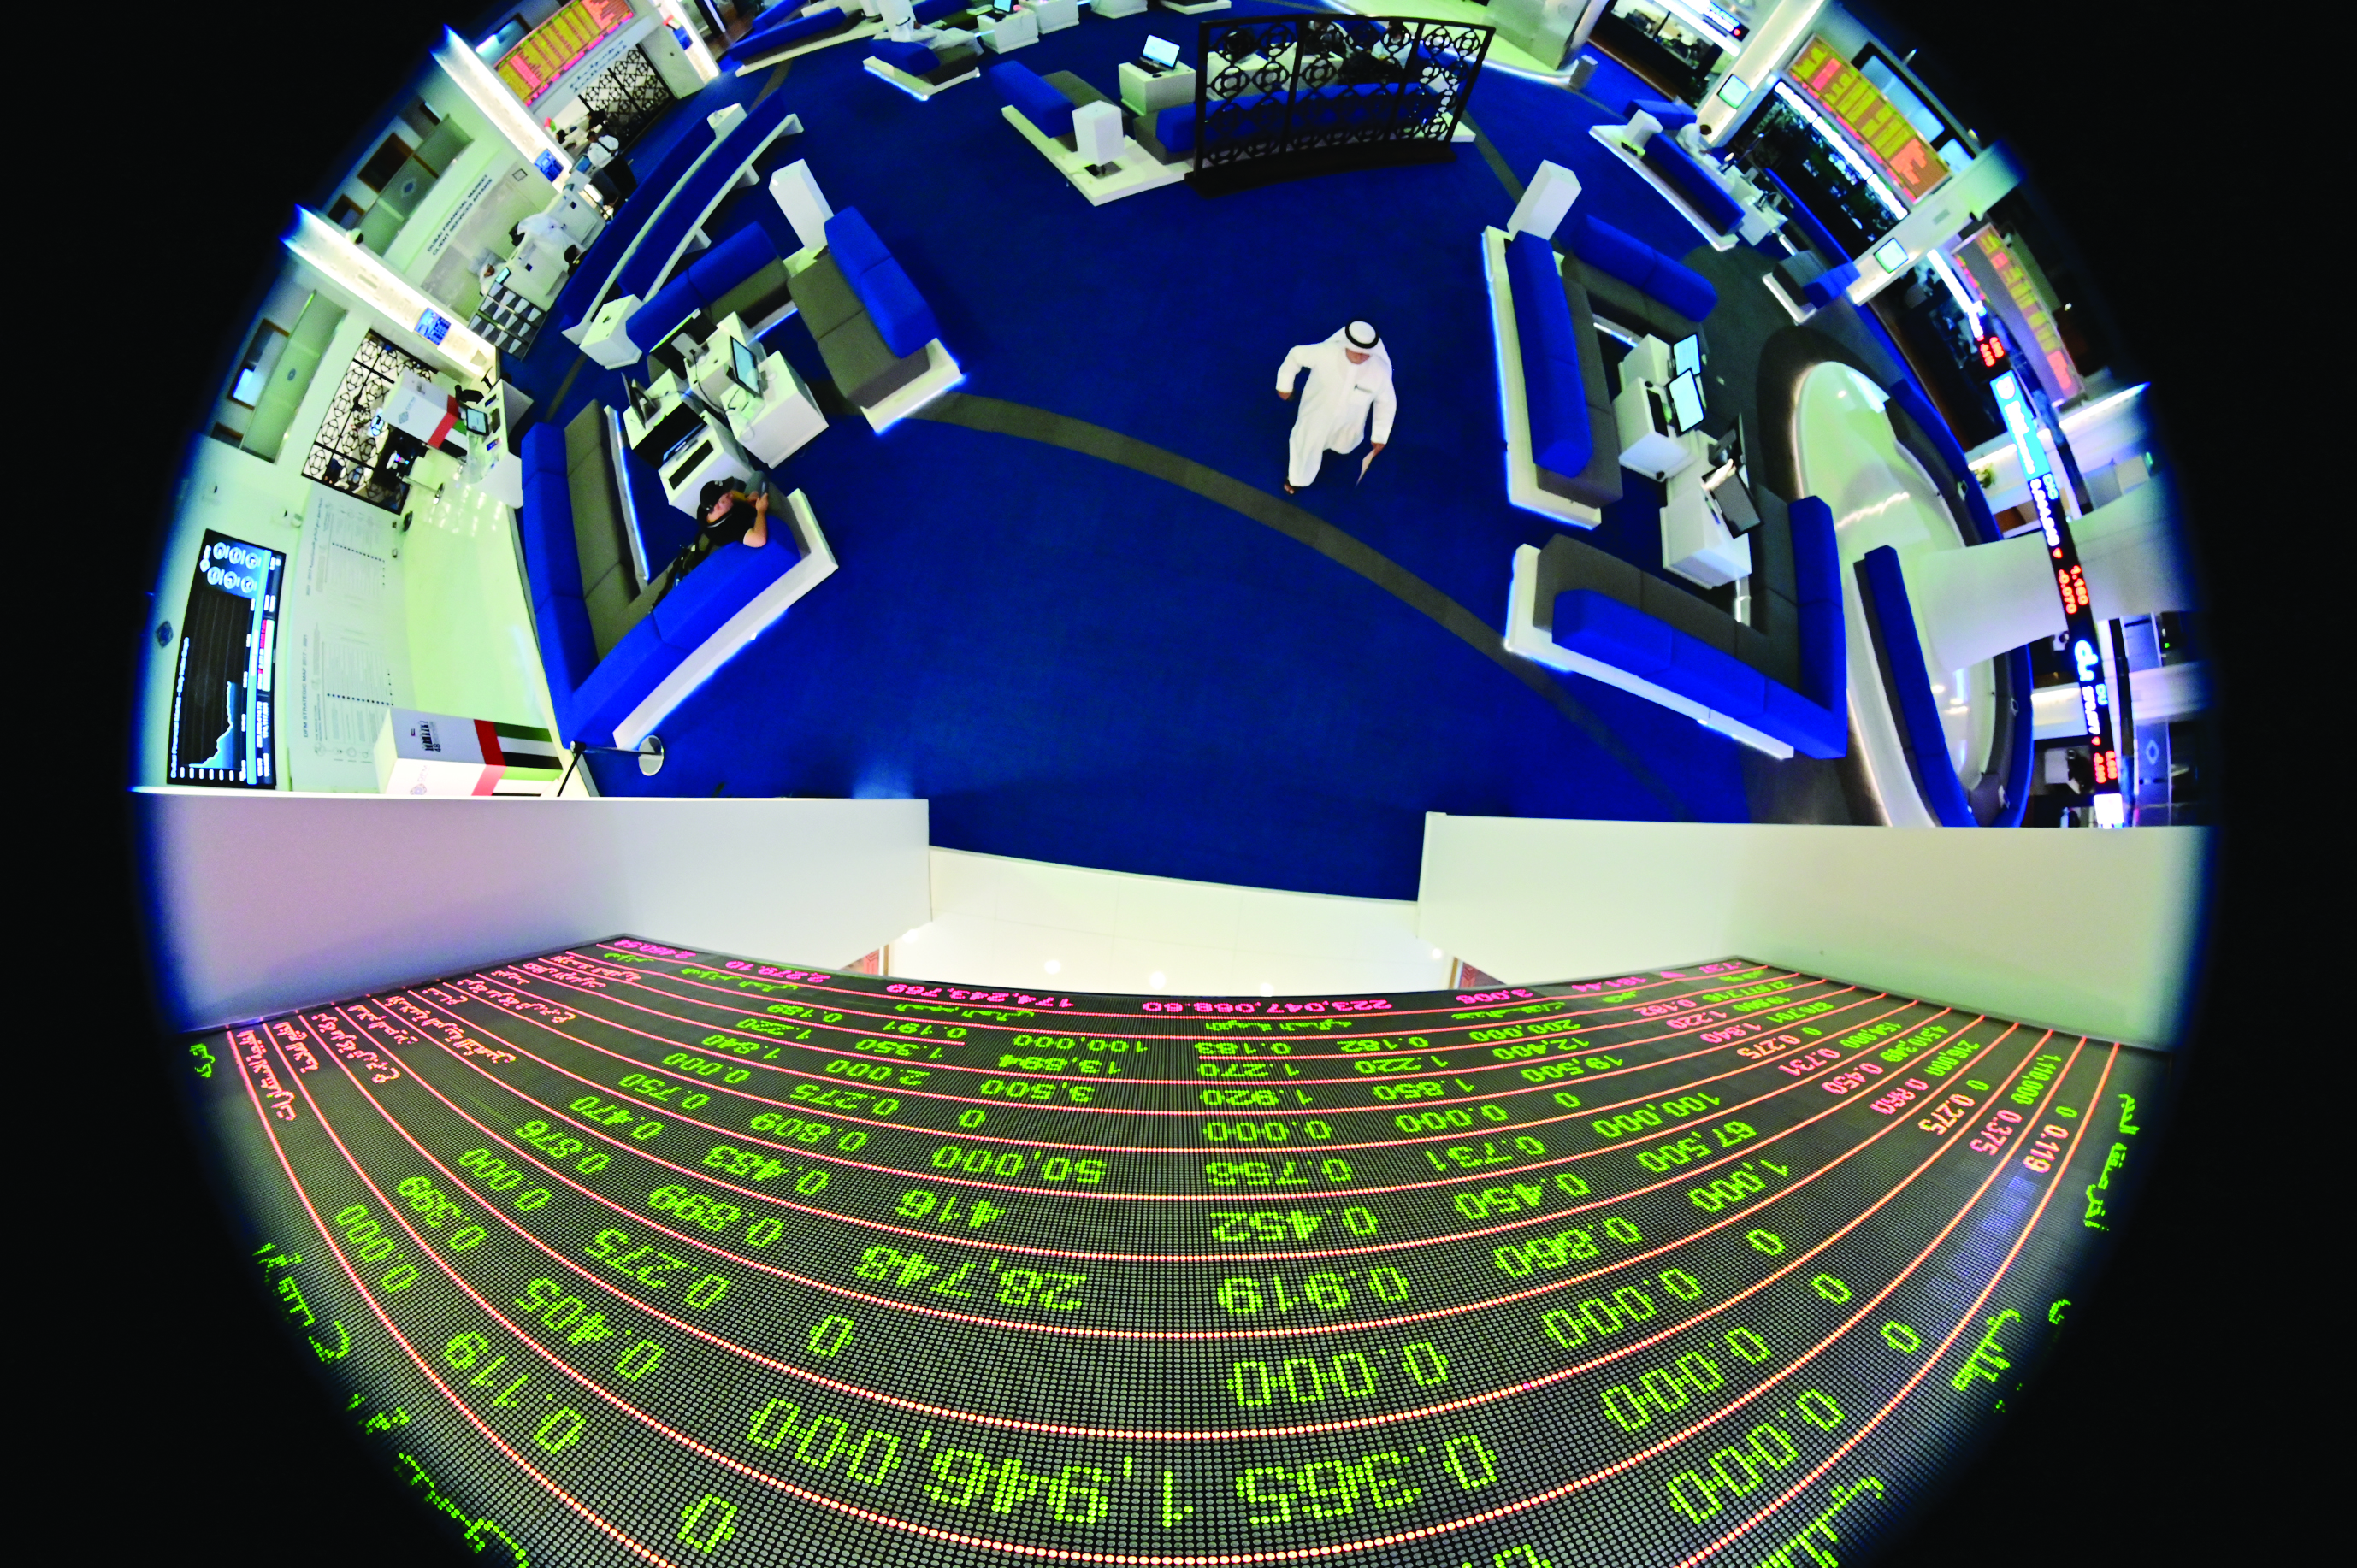 A picture taken with a fisheye lense shows traders walking by beneath a stock display board at the Dubai Stock Exchange in the United Arab Emirates, on March 8, 2020. - Saudi's stock exchange fell 6.5 percent and other Gulf markets tumbled to multi-year lows at the start of trading after OPEC and its allies failed to clinch a deal over oil production cuts. (Photo by GIUSEPPE CACACE / AFP)